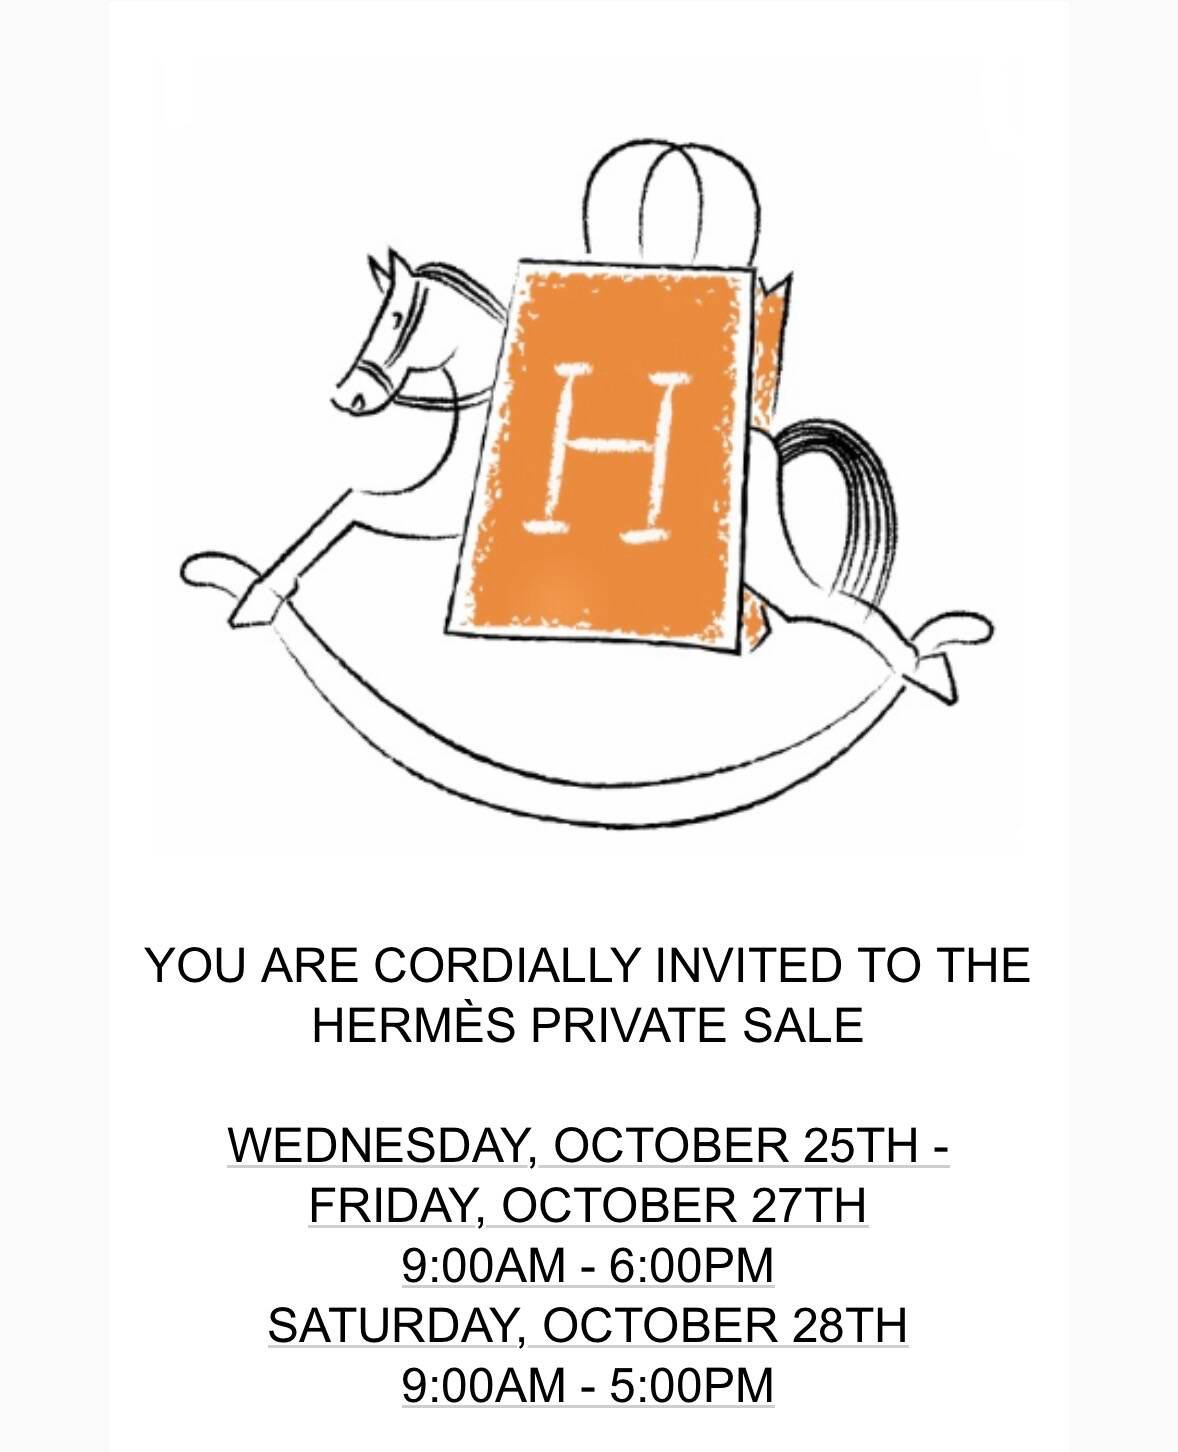 Cheap Hermes Small Wallets Outlet Sale,Hermes Online Store